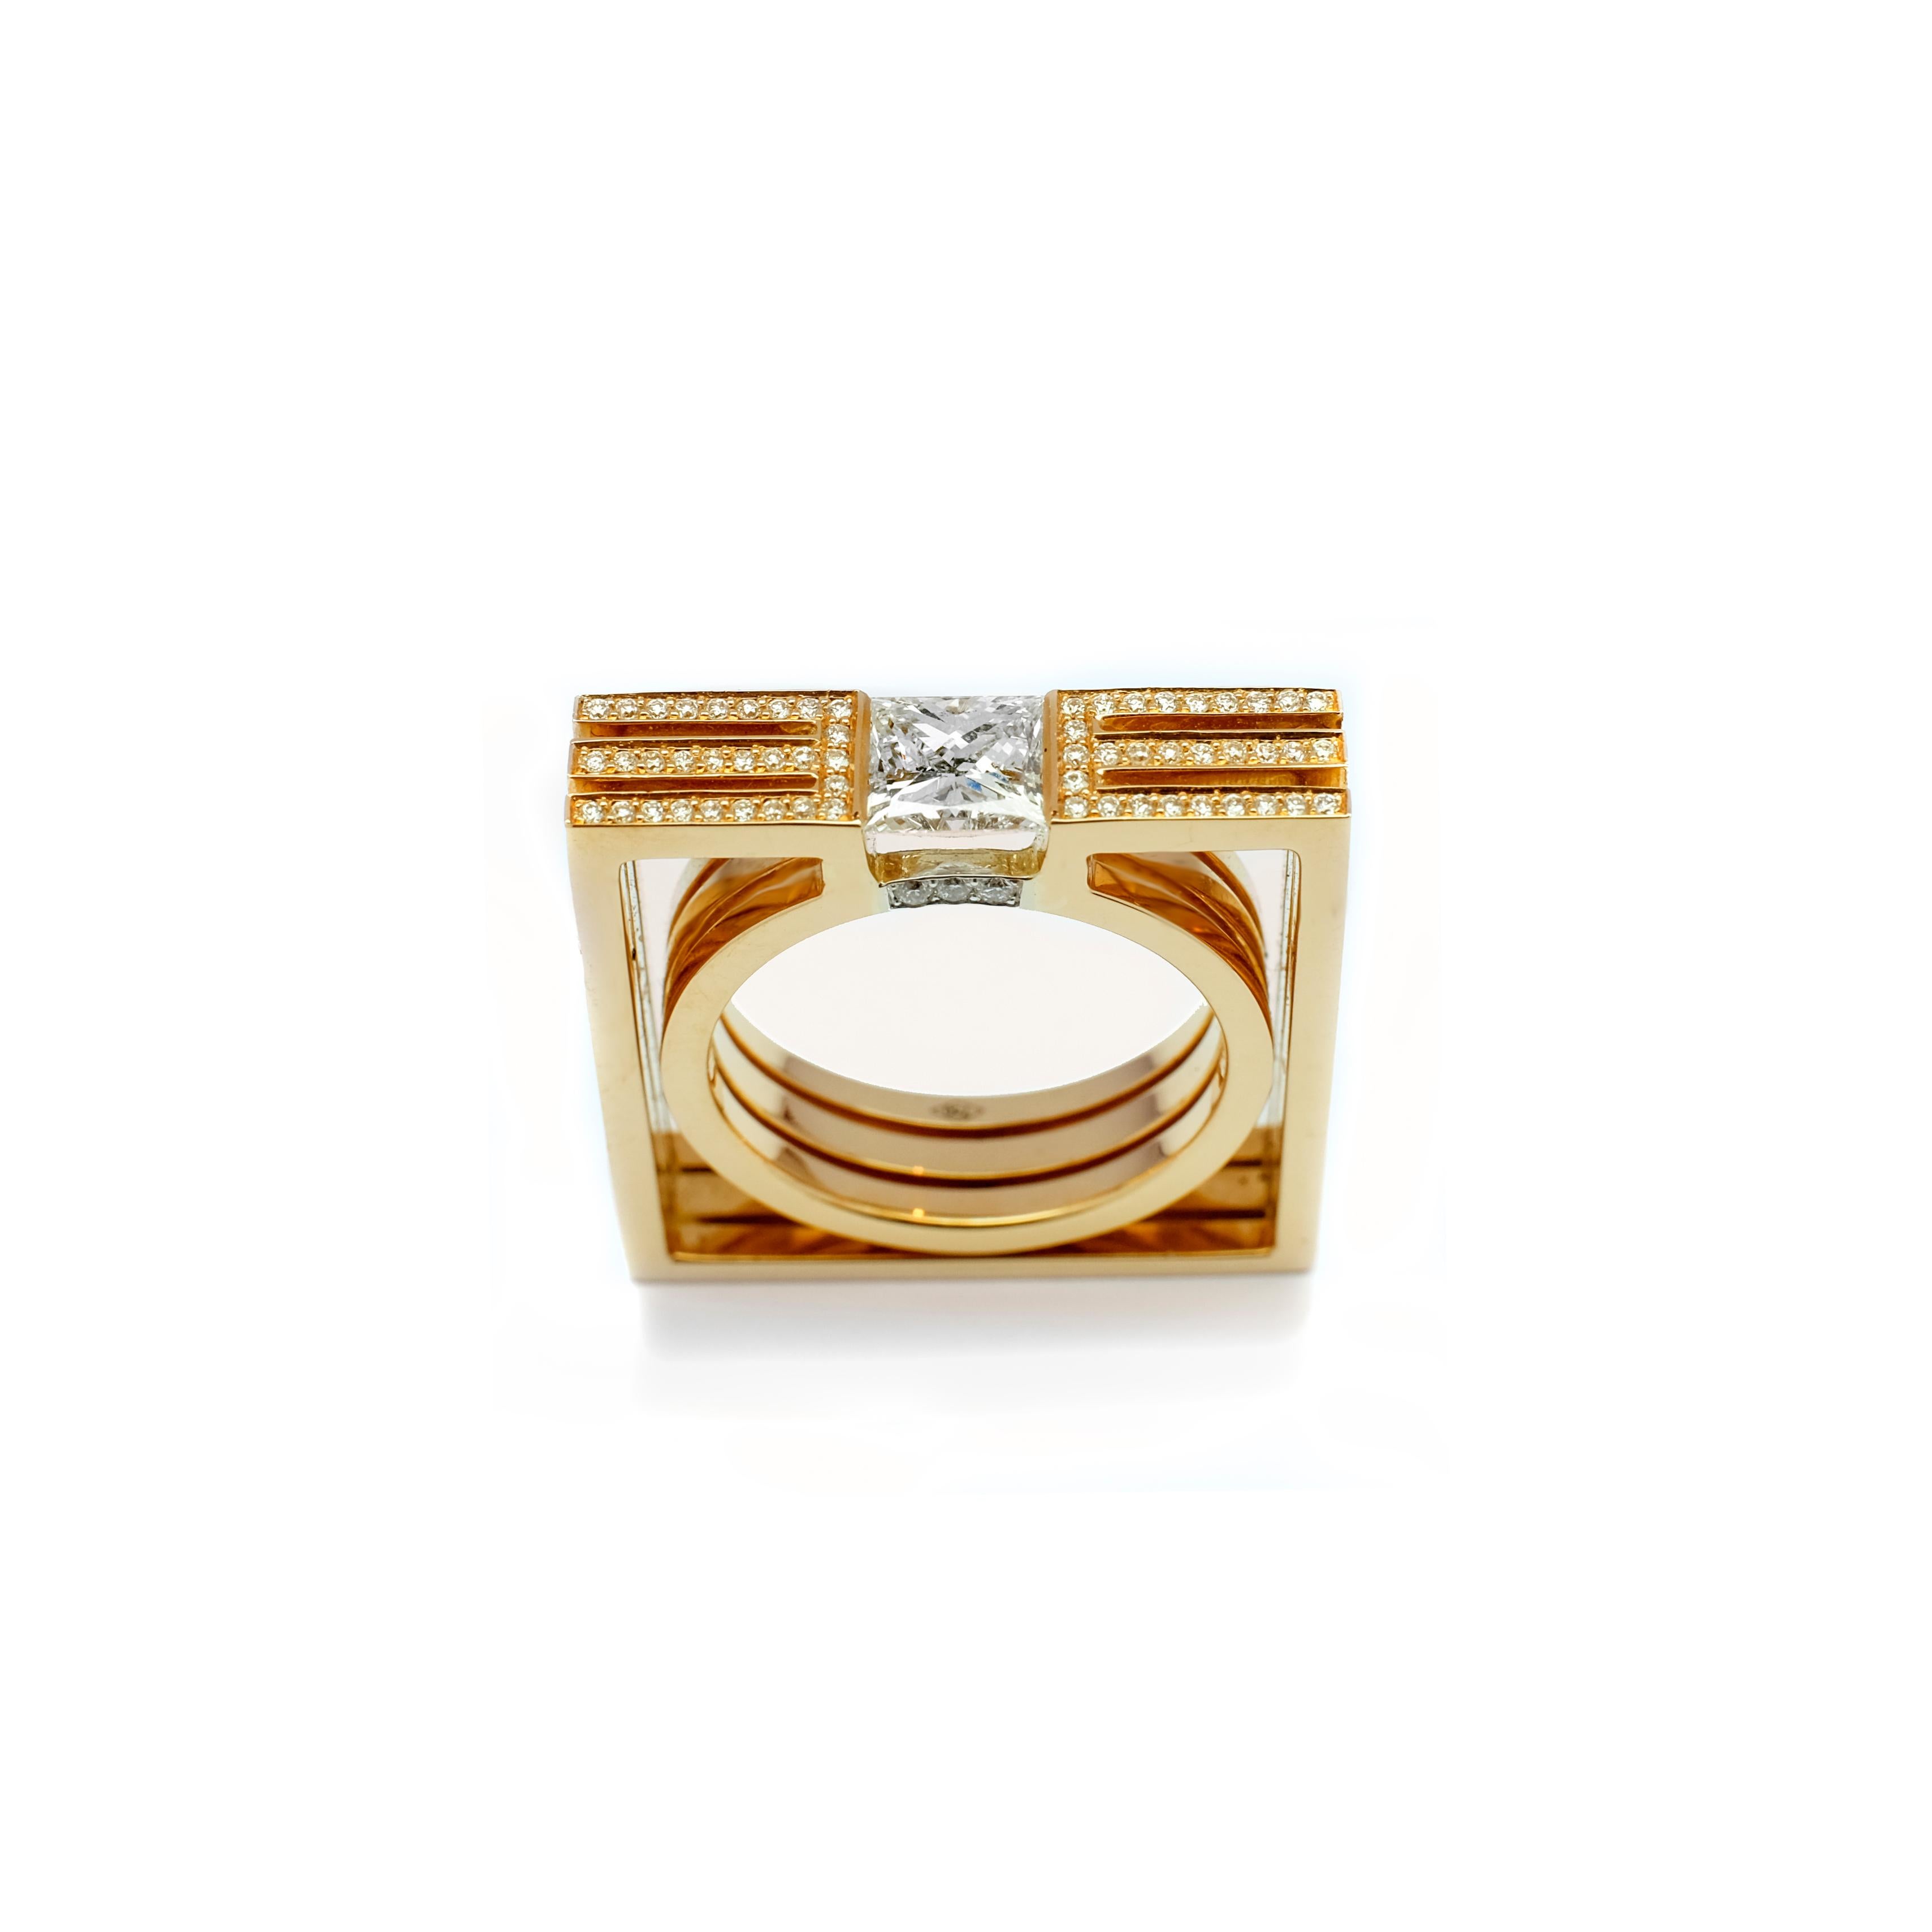 This square modernistic ring is made of 18 karat yellow gold.
The ring is not only pretty from the top it's also nice from the side views as seen in the pictures.
The center princess cut diamond is set without claws to give a floating effect, weighs